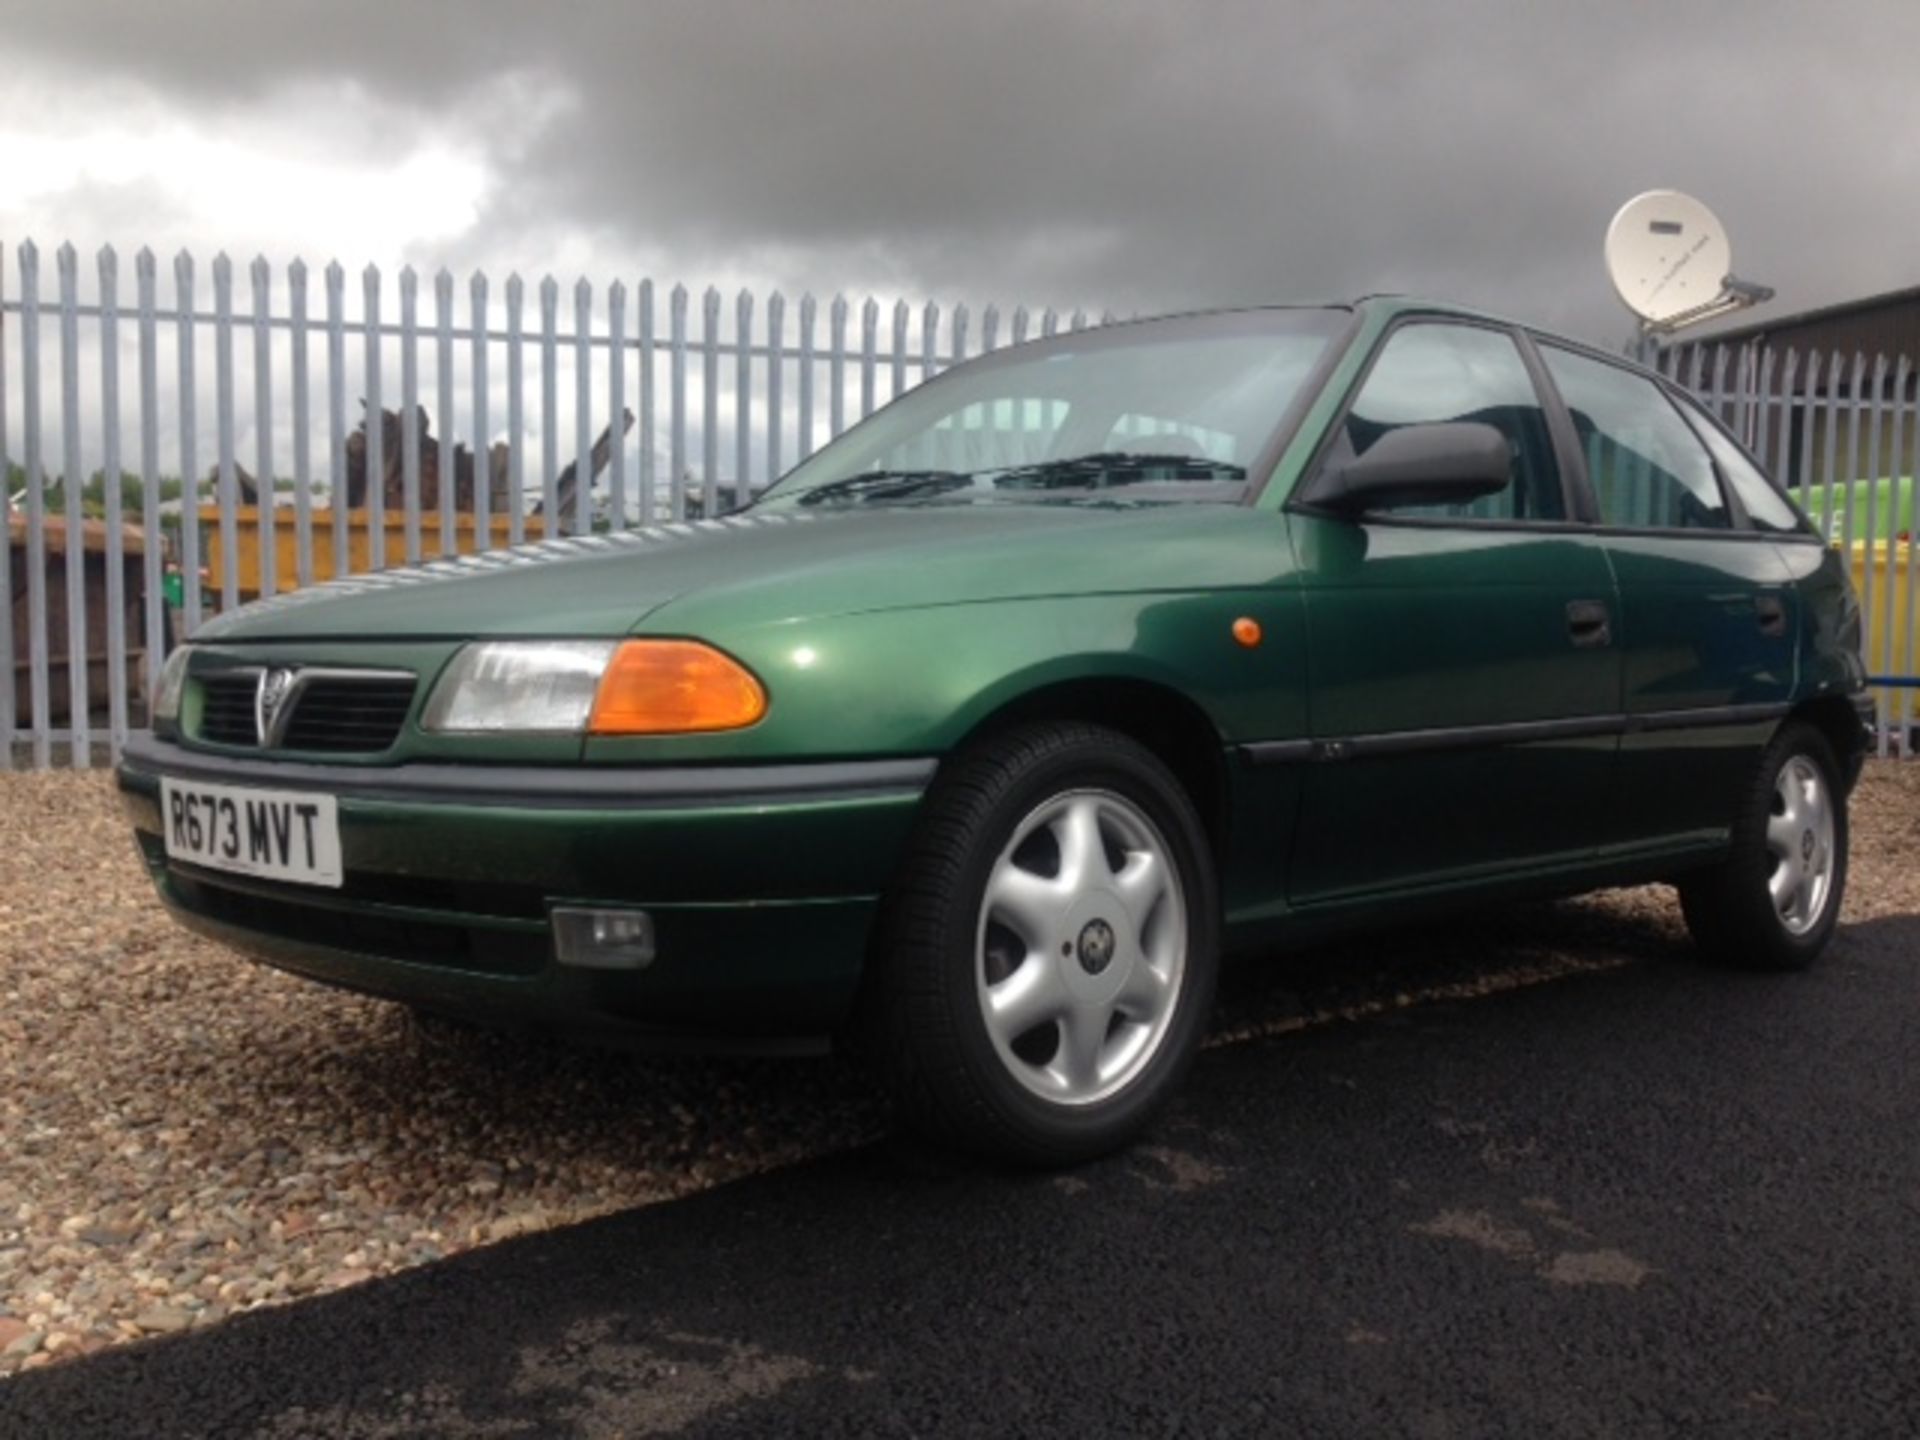 VAUXHALL, ASTRA LS - 1598cc, Chassis number W0L0TFF68W8058251 - presented in Rio Verde Green